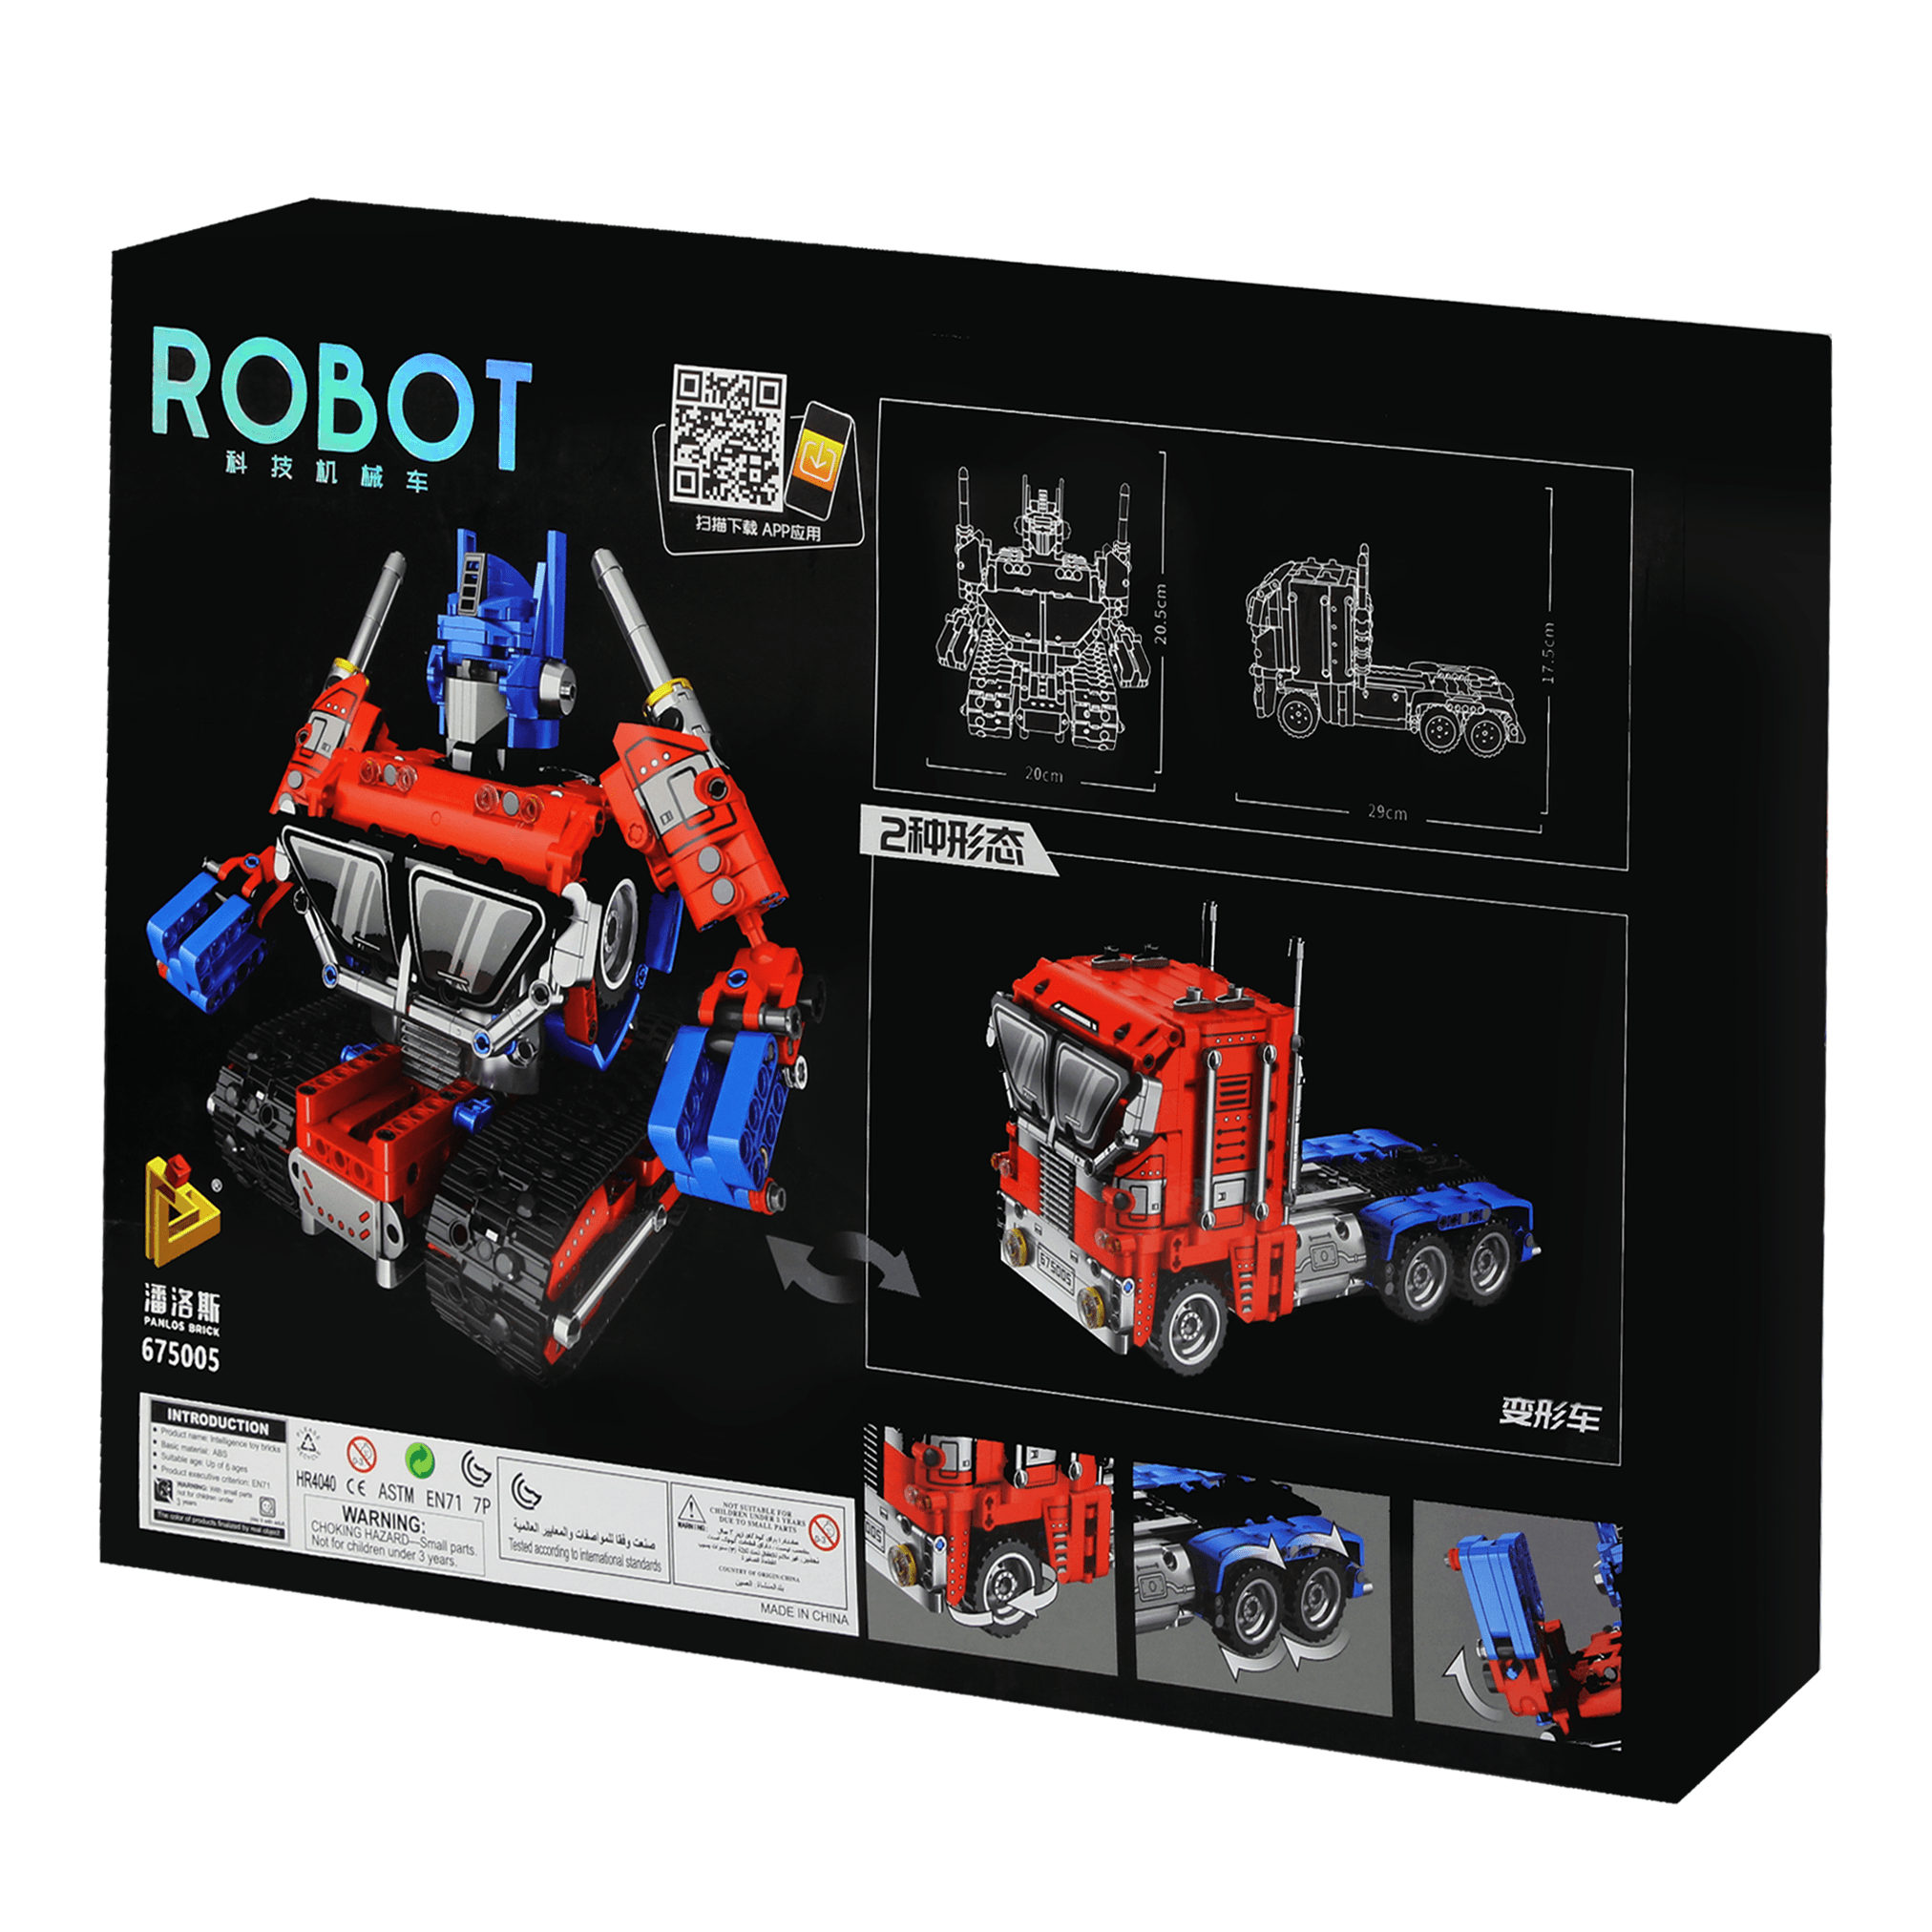 2in1 Technical RC Robot Truck Car Building Blocks Model Creative APP Programming Remote Control Bricks Toy - BumbleToys - 14 Years & Up, 18+, Boys, Cars, Creator Expert, LEGO, OXE, Toy Land, Transformers